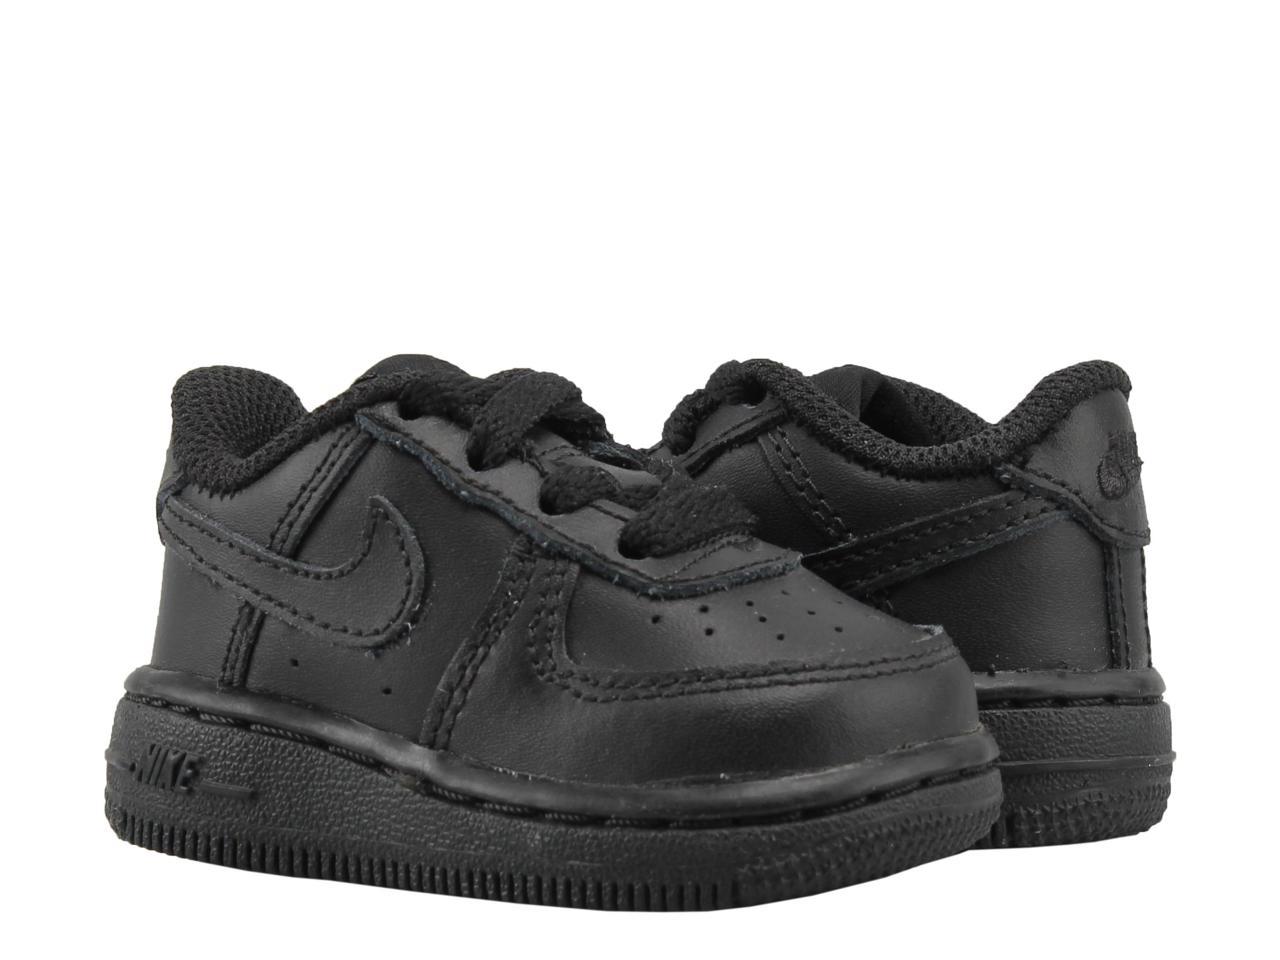 kids air force 1 size 2